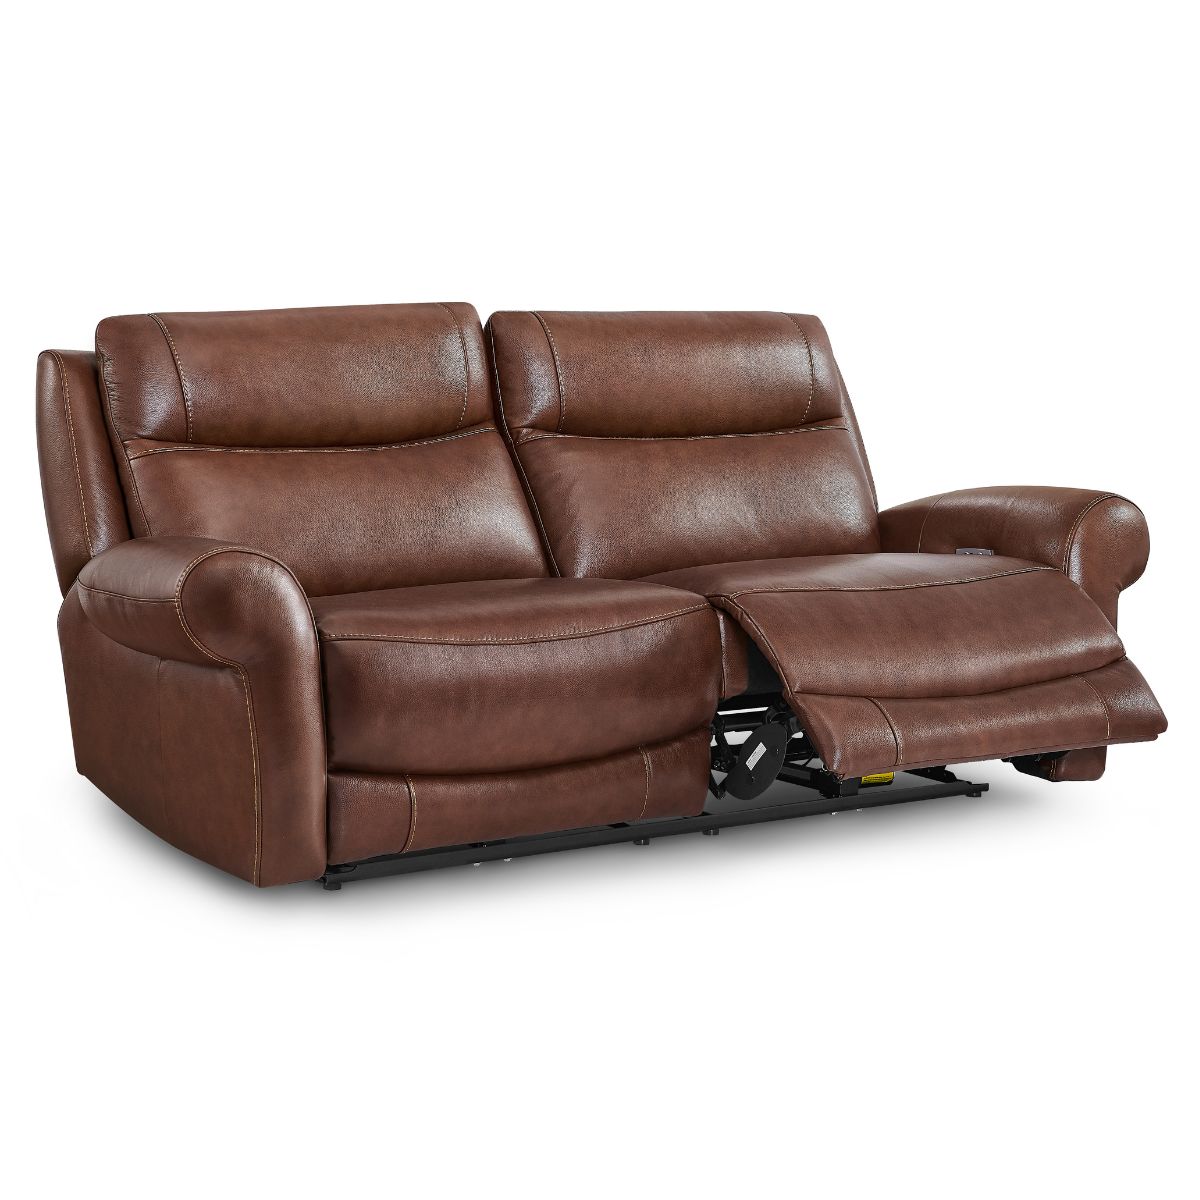 Lindfield Tan Leather 3 Seater Powered Recliner - 2